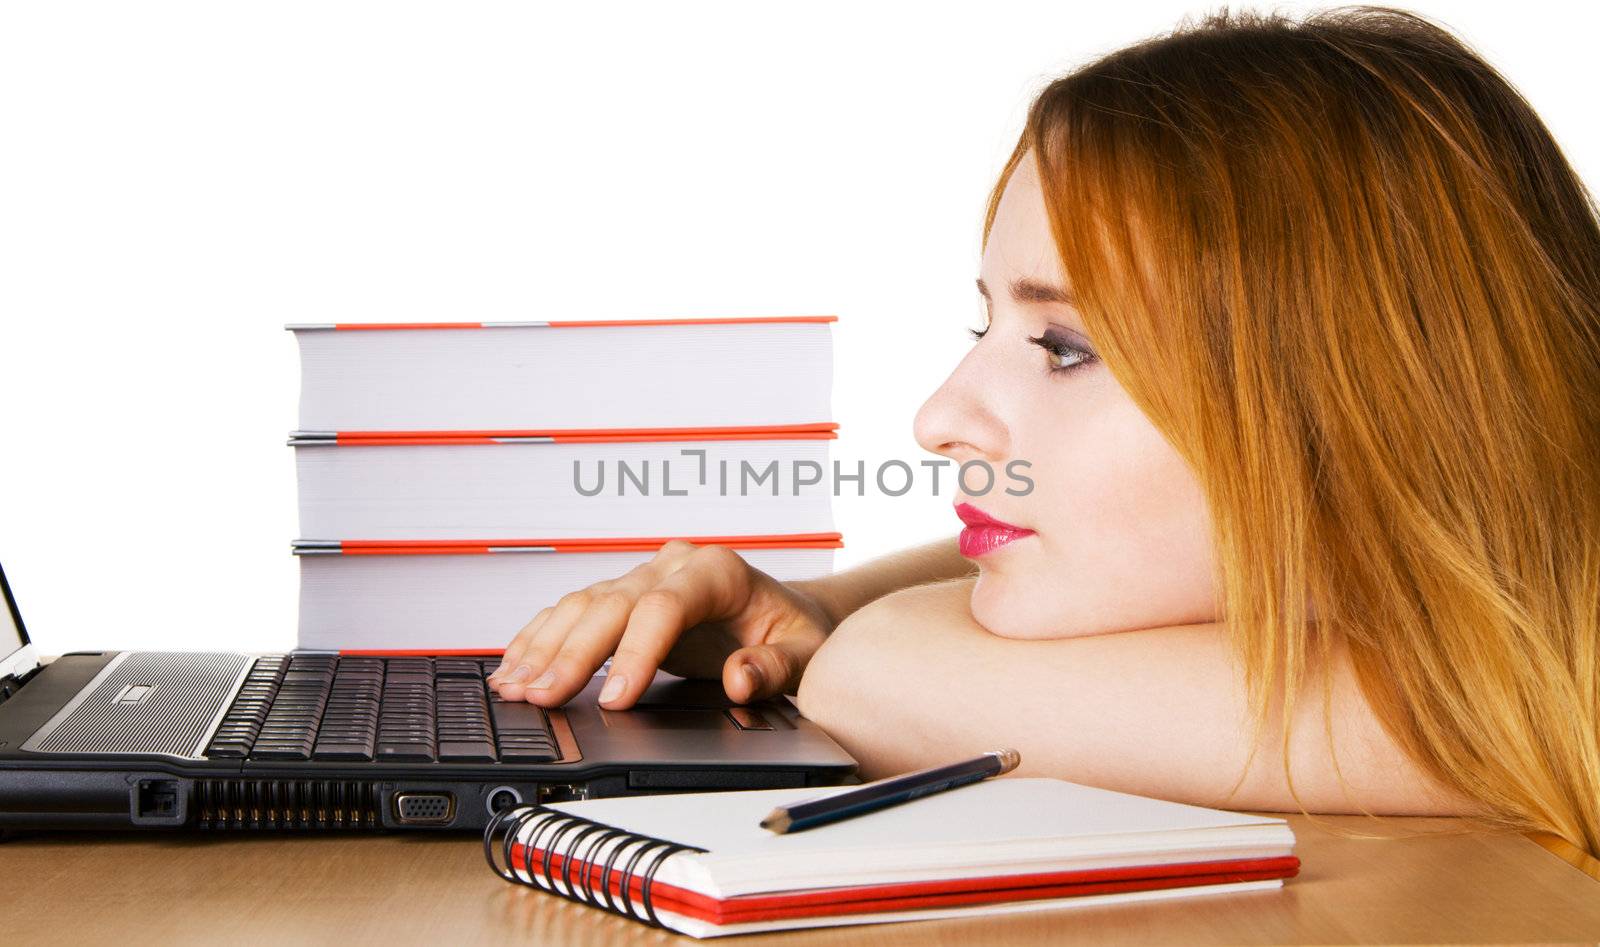 Young girl surfing the internet at her laptop